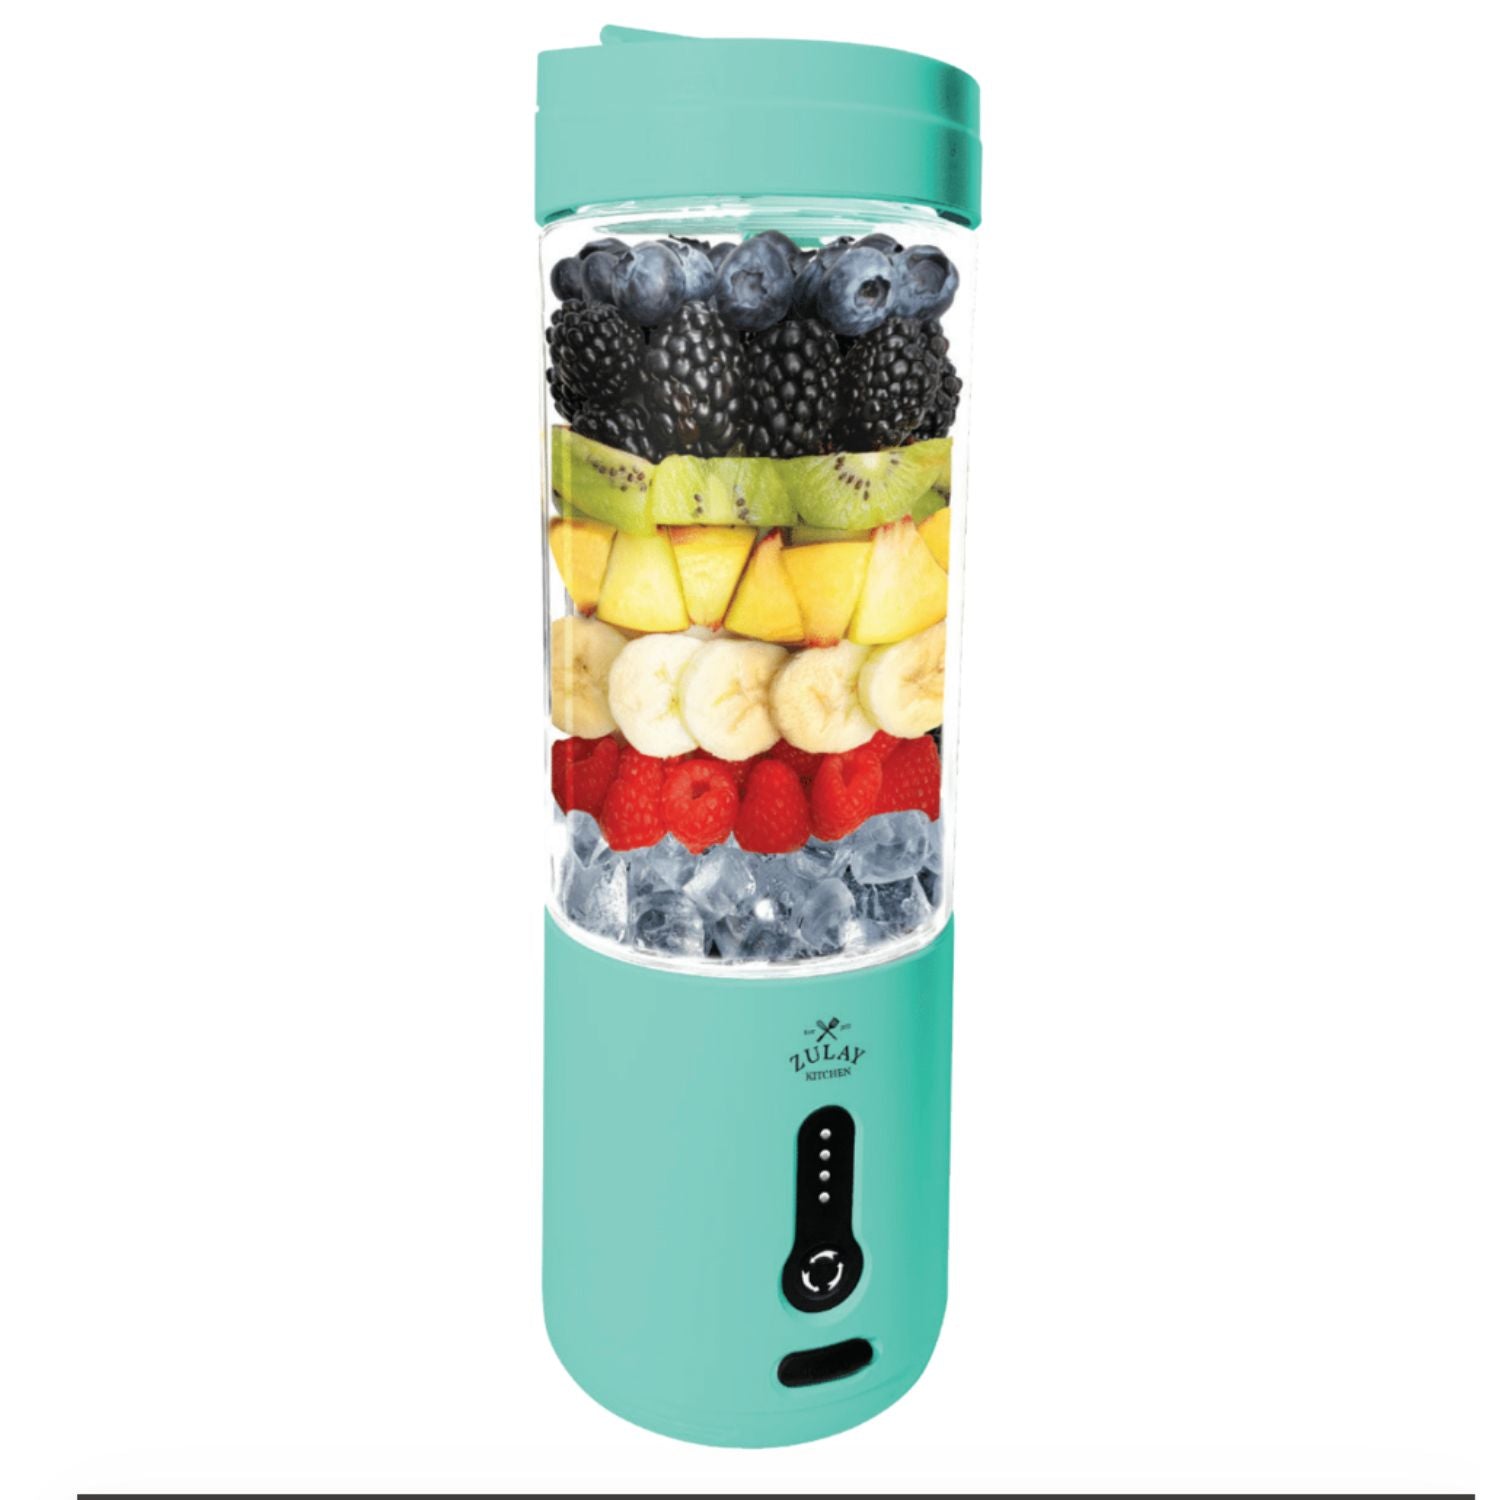 Portable blender by Zulay Kitchen